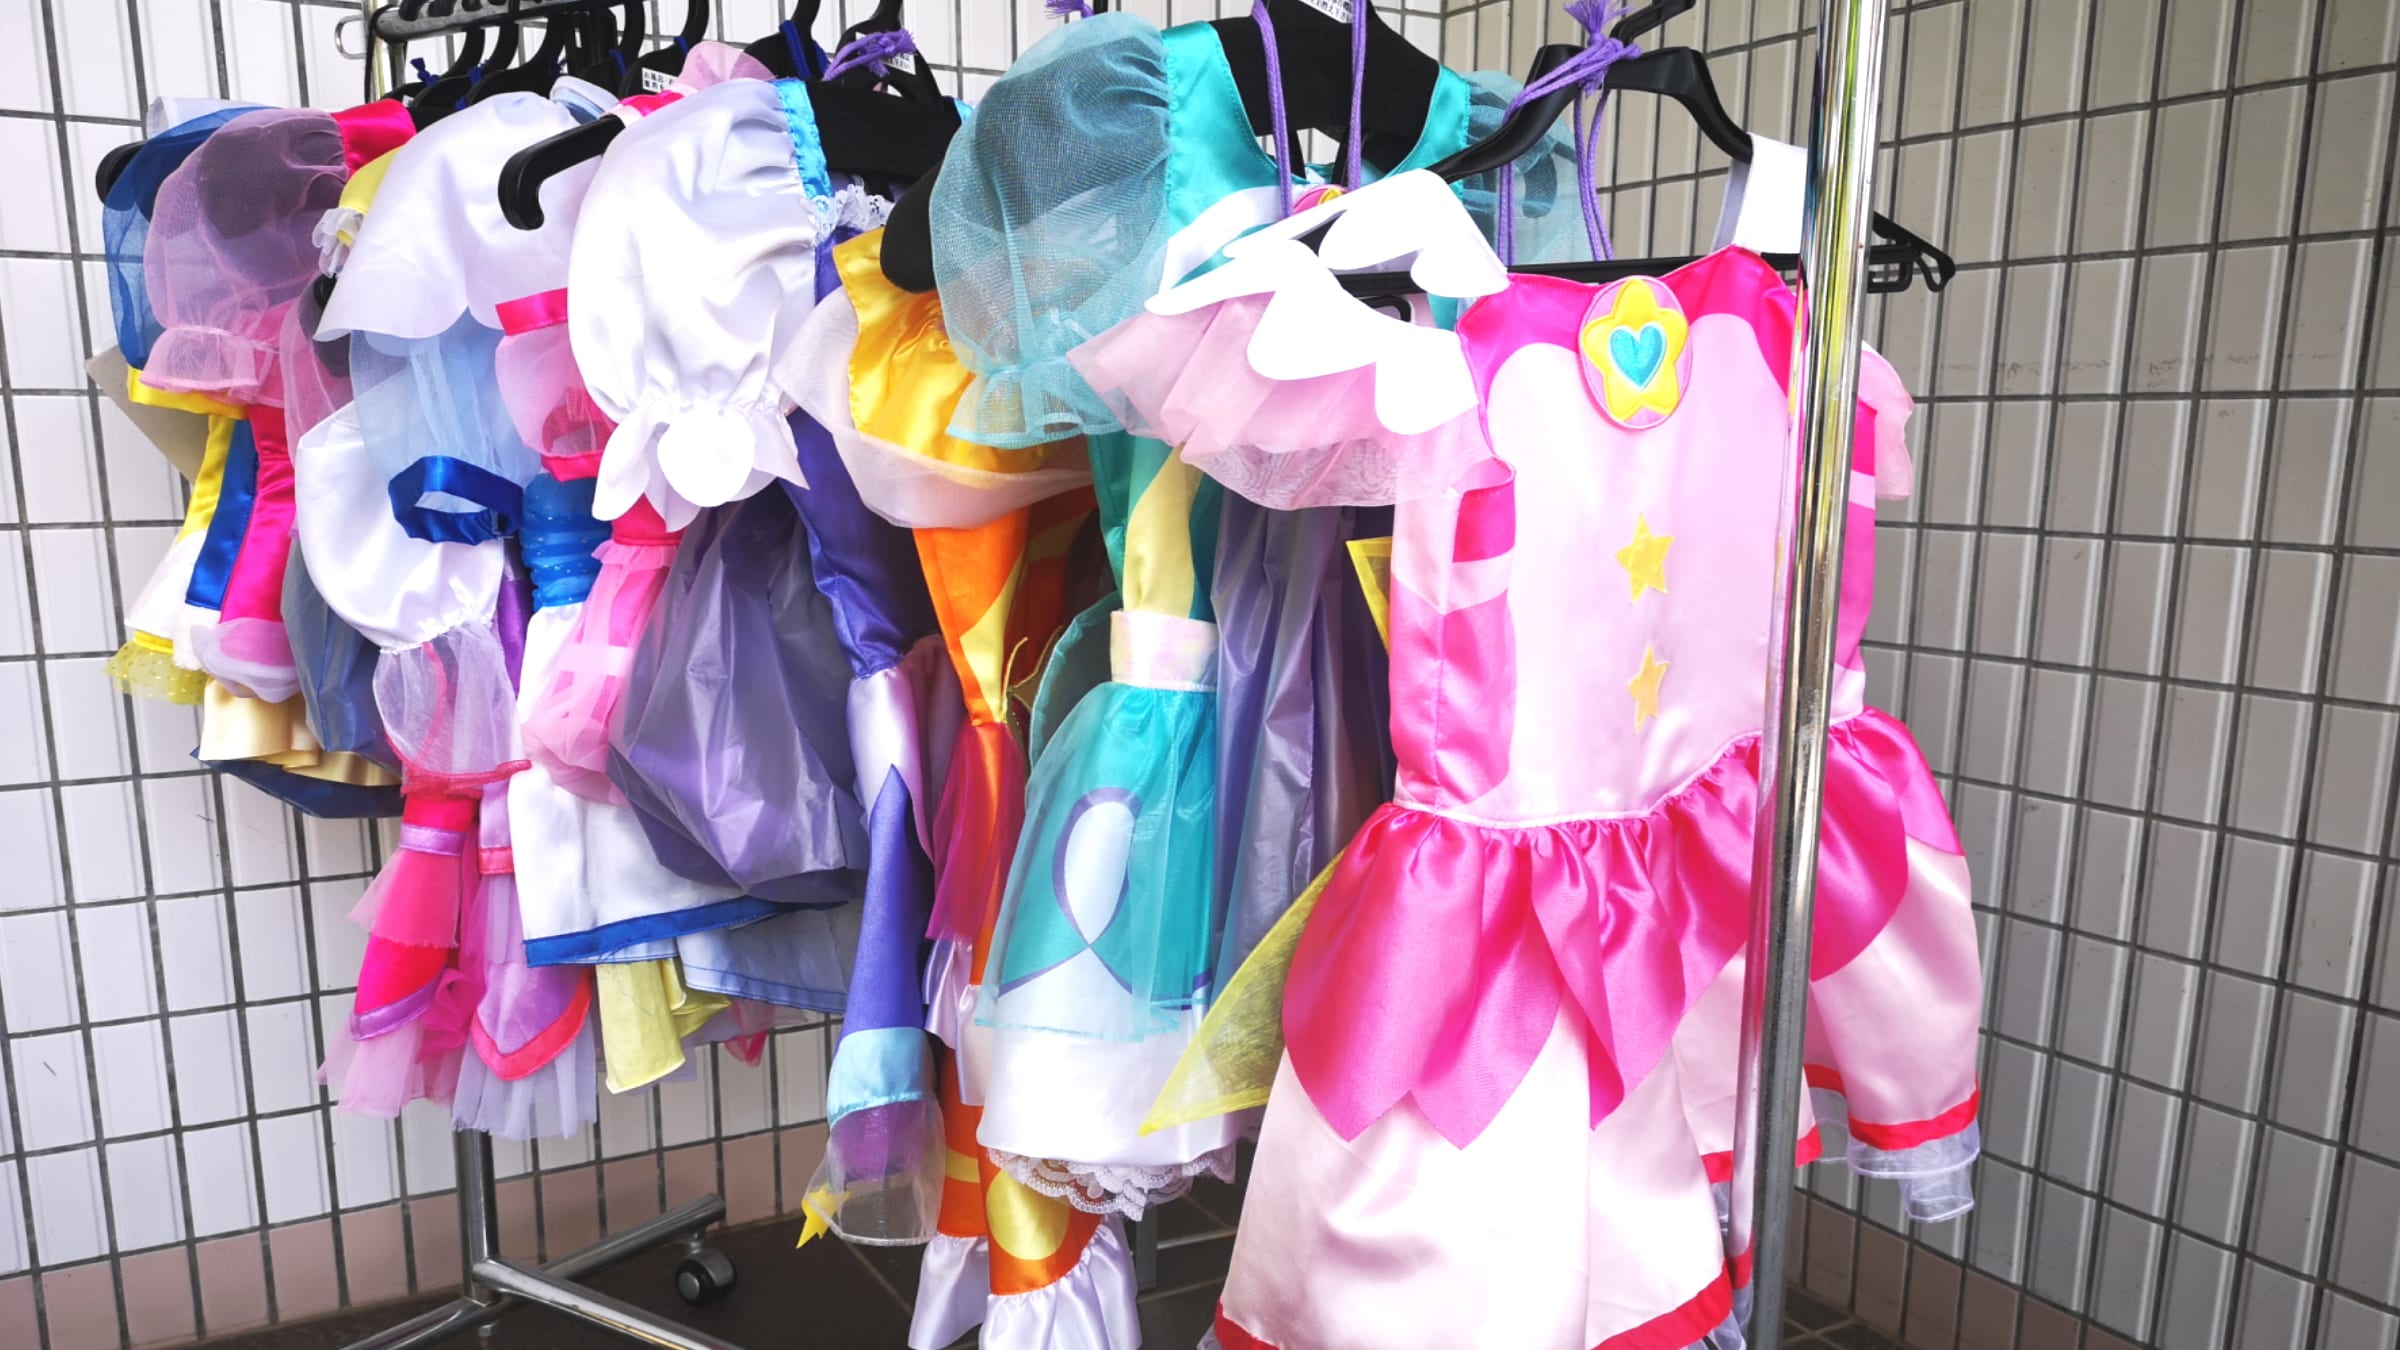 ■Bonus■ Limited costume rental for "Pretty Cure Pretty Room" users only